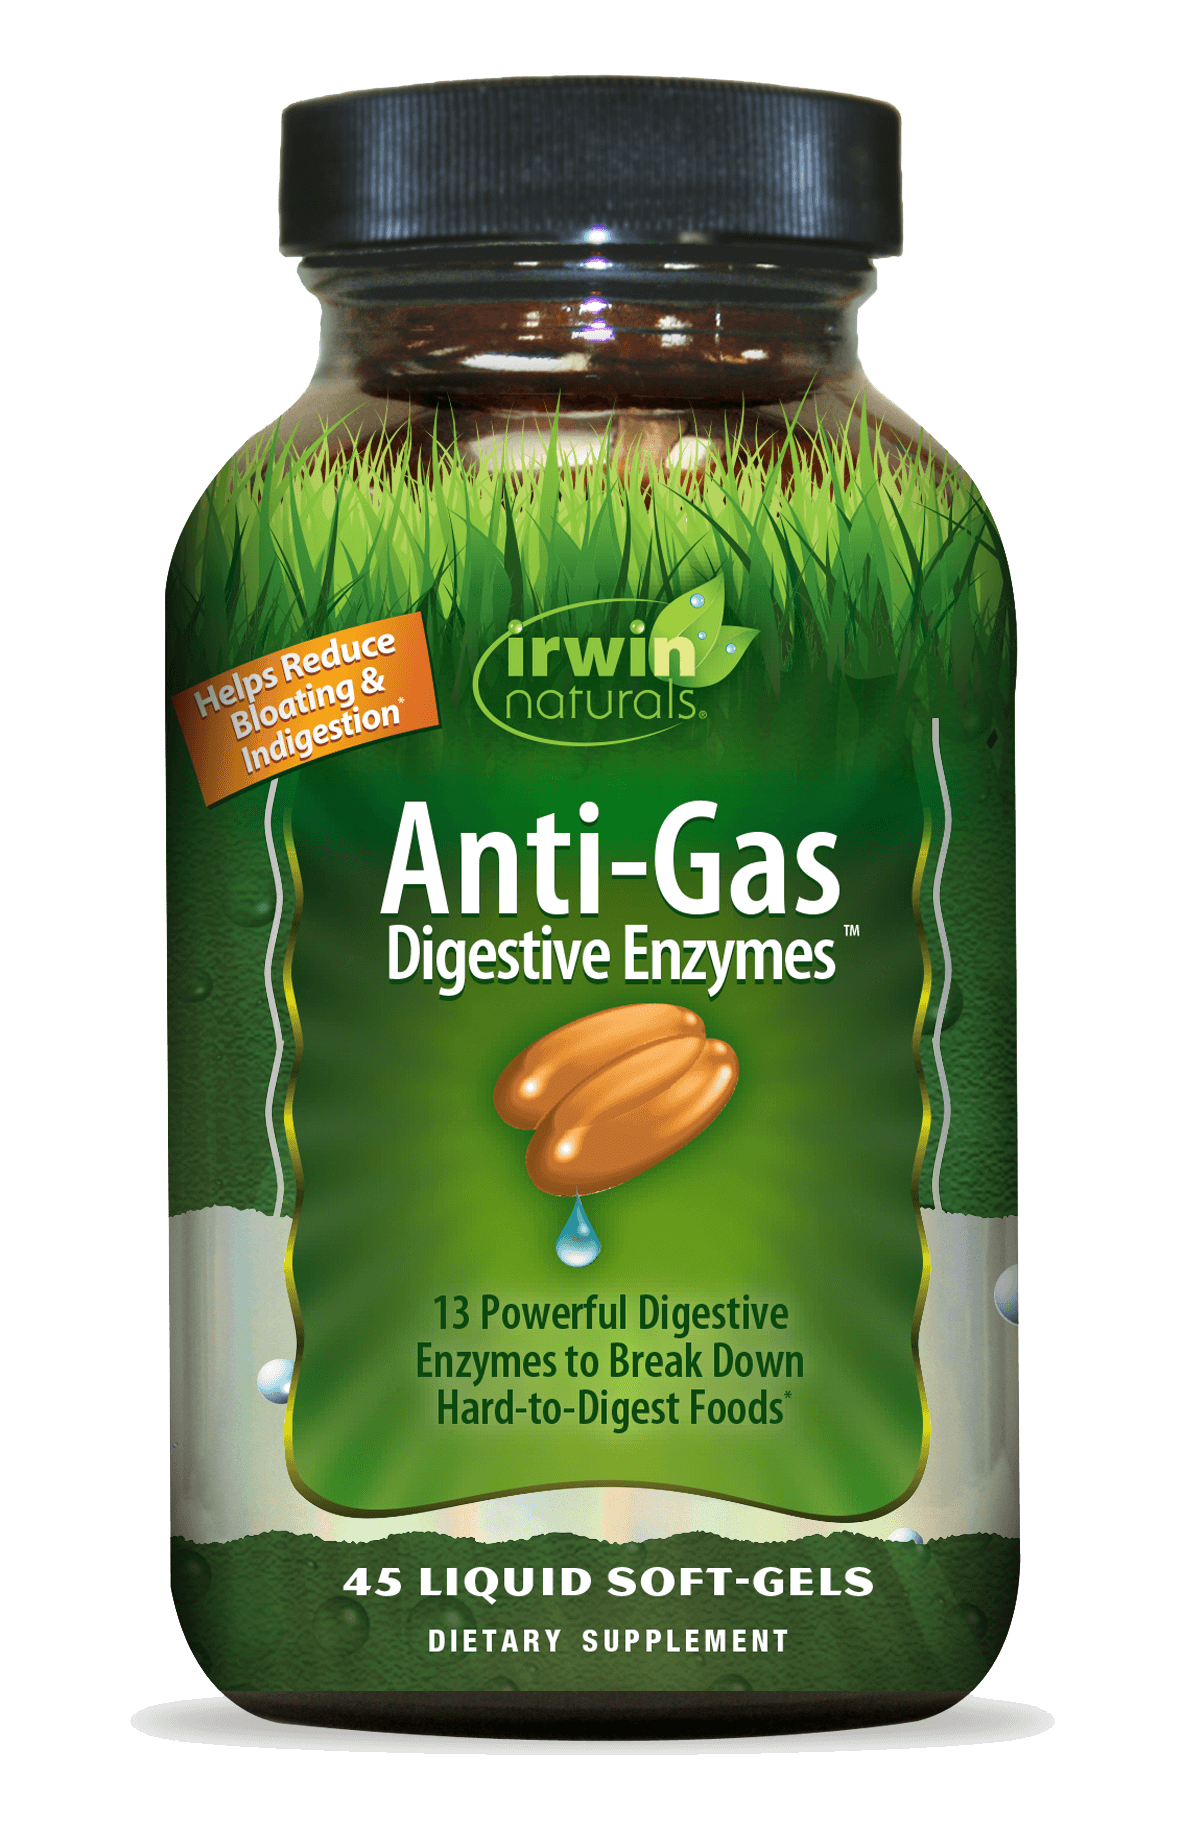 Anti-Gas Digestive Enzymes by Irwin Naturals Digestive Aid